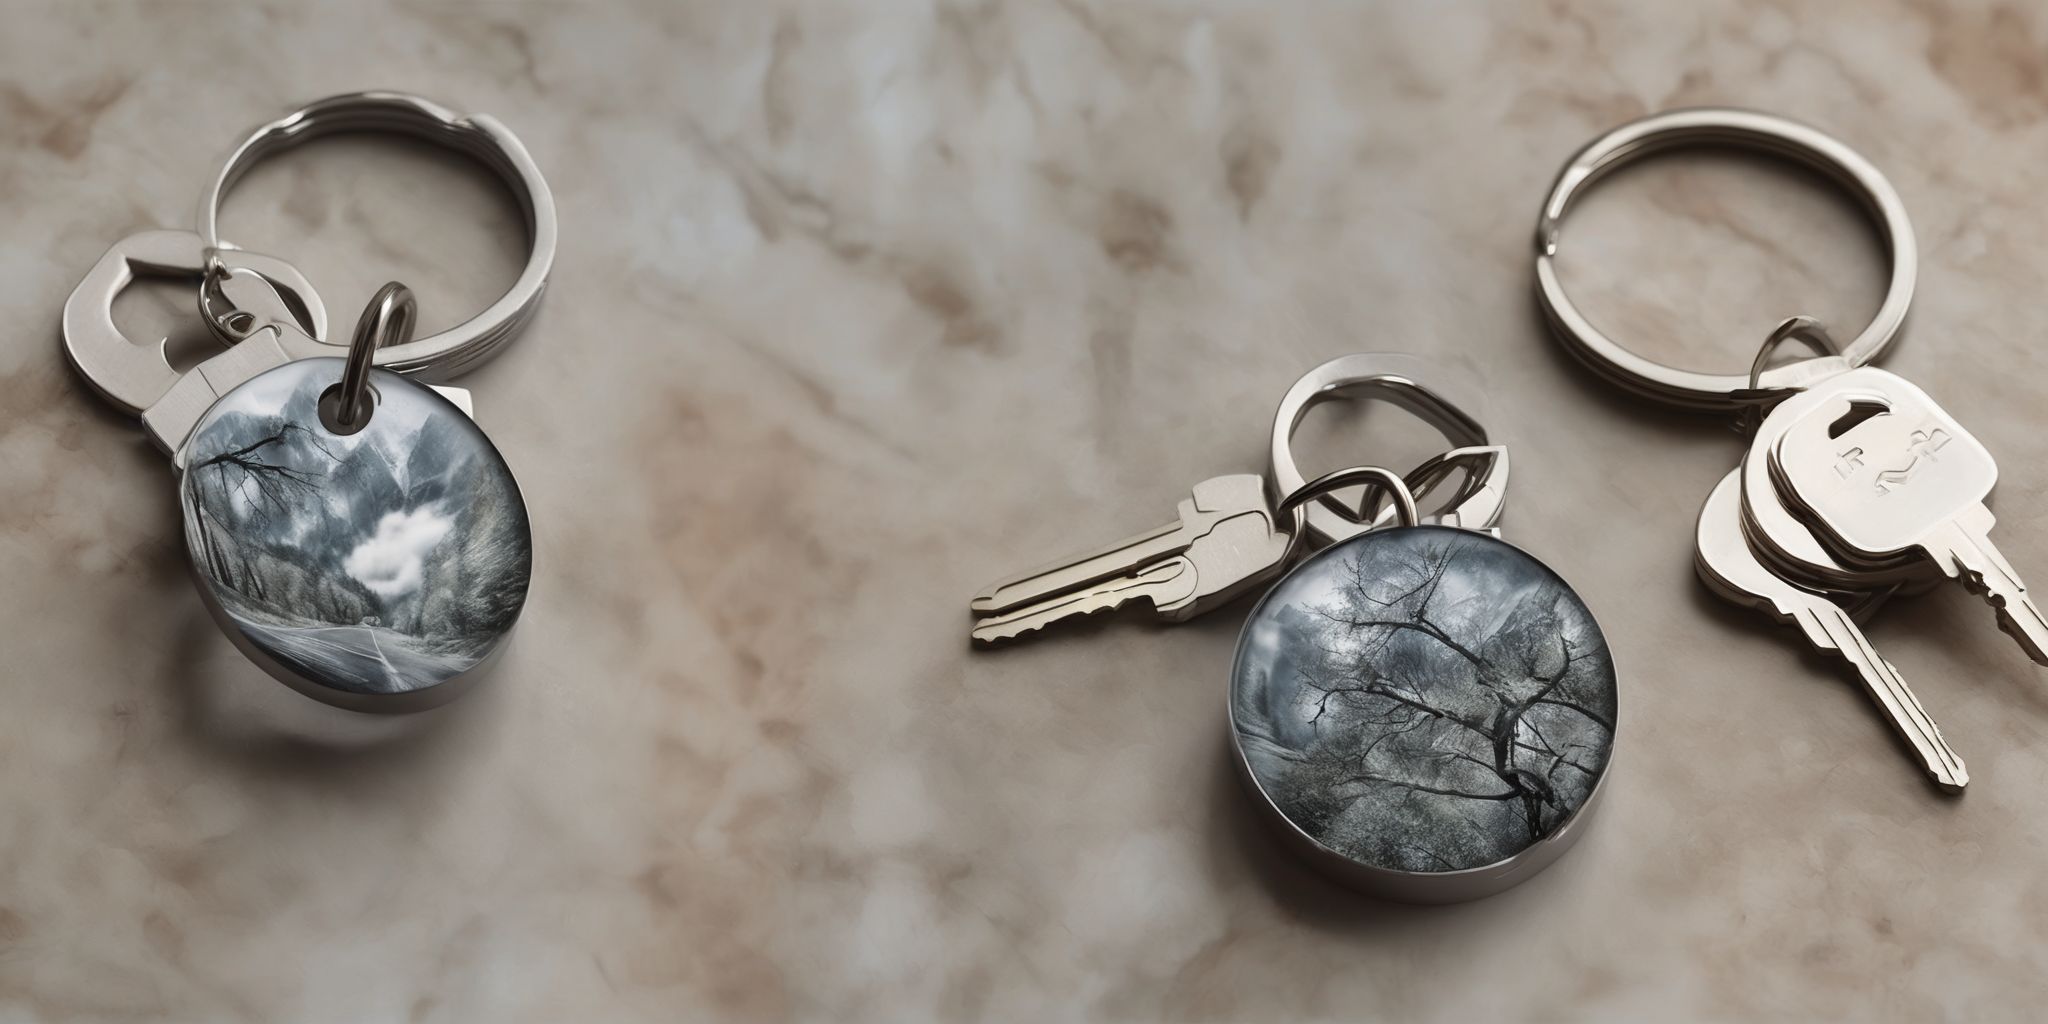 Keychain  in realistic, photographic style